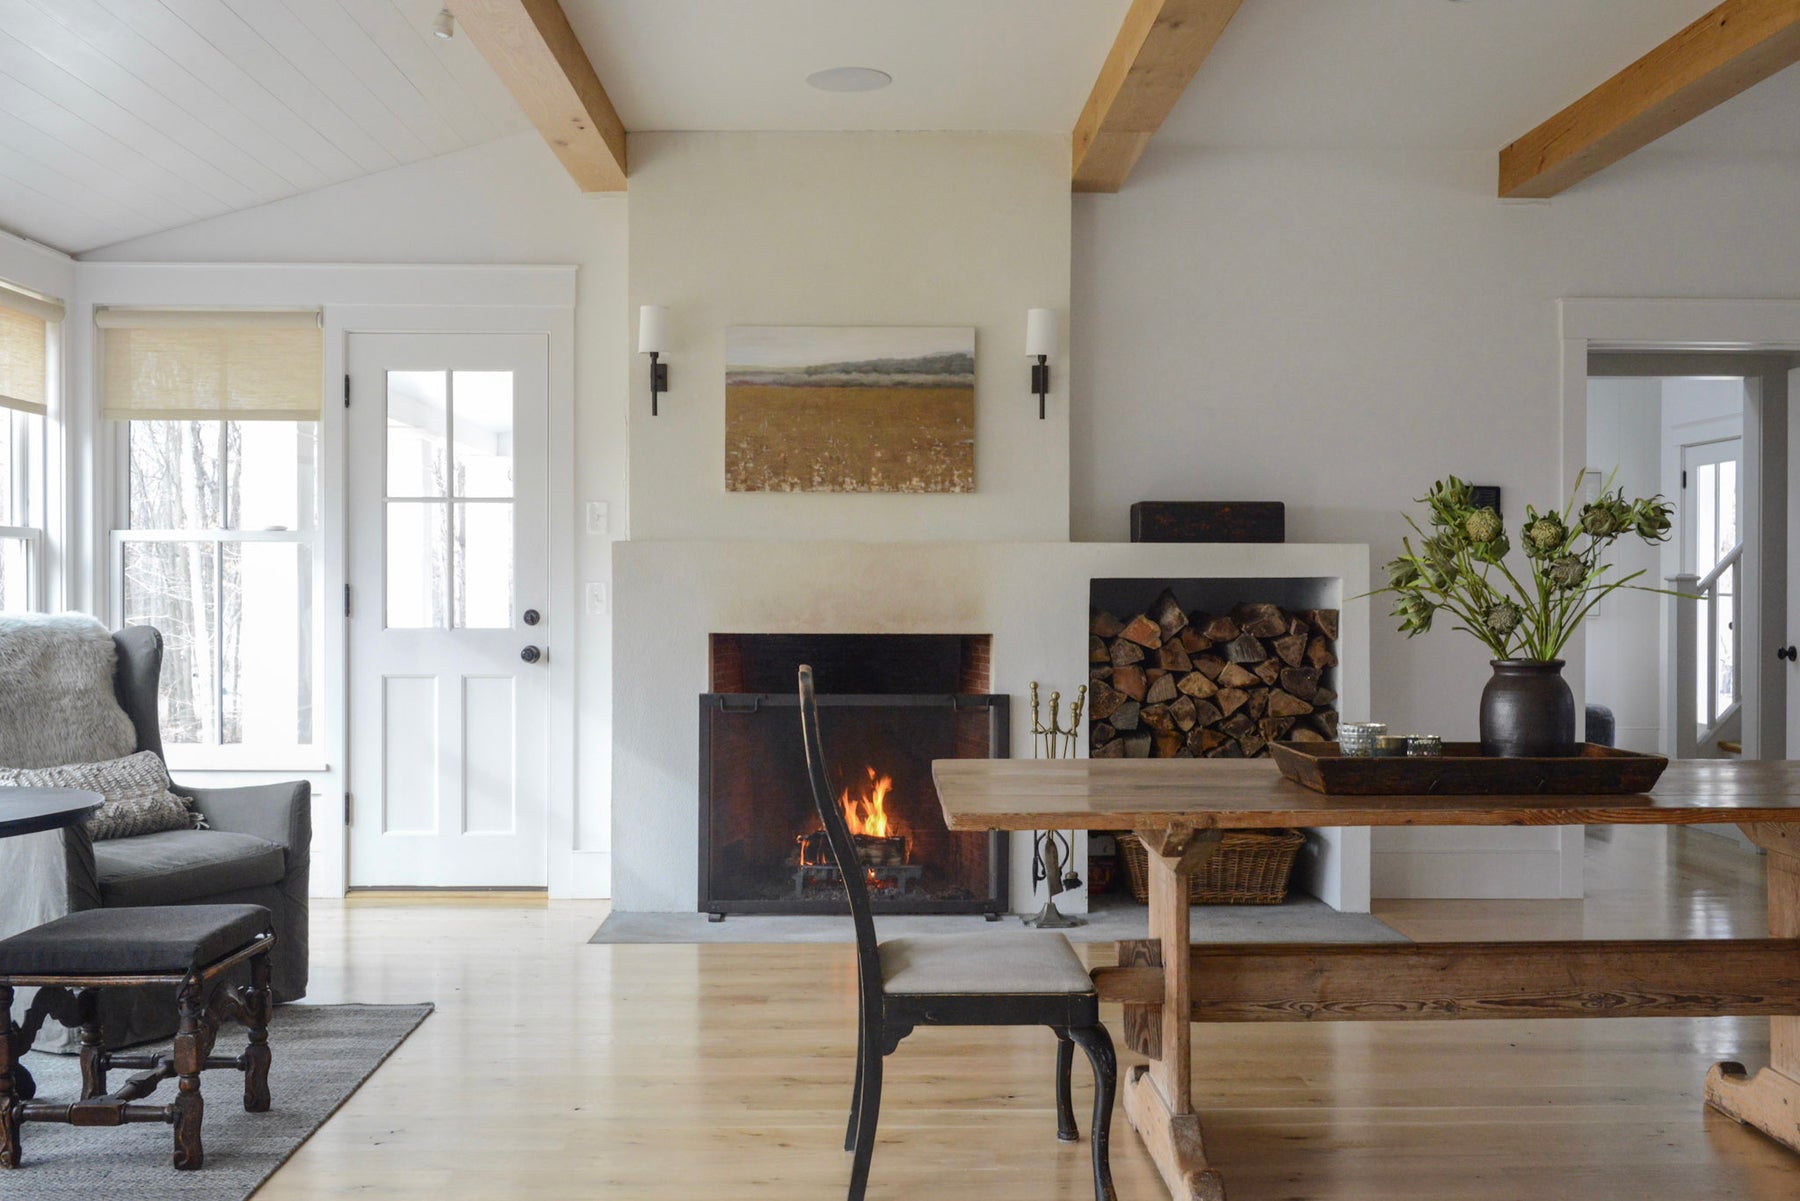 About Us | Styled winter living room with exposed beams, wood floors, and live fireplace